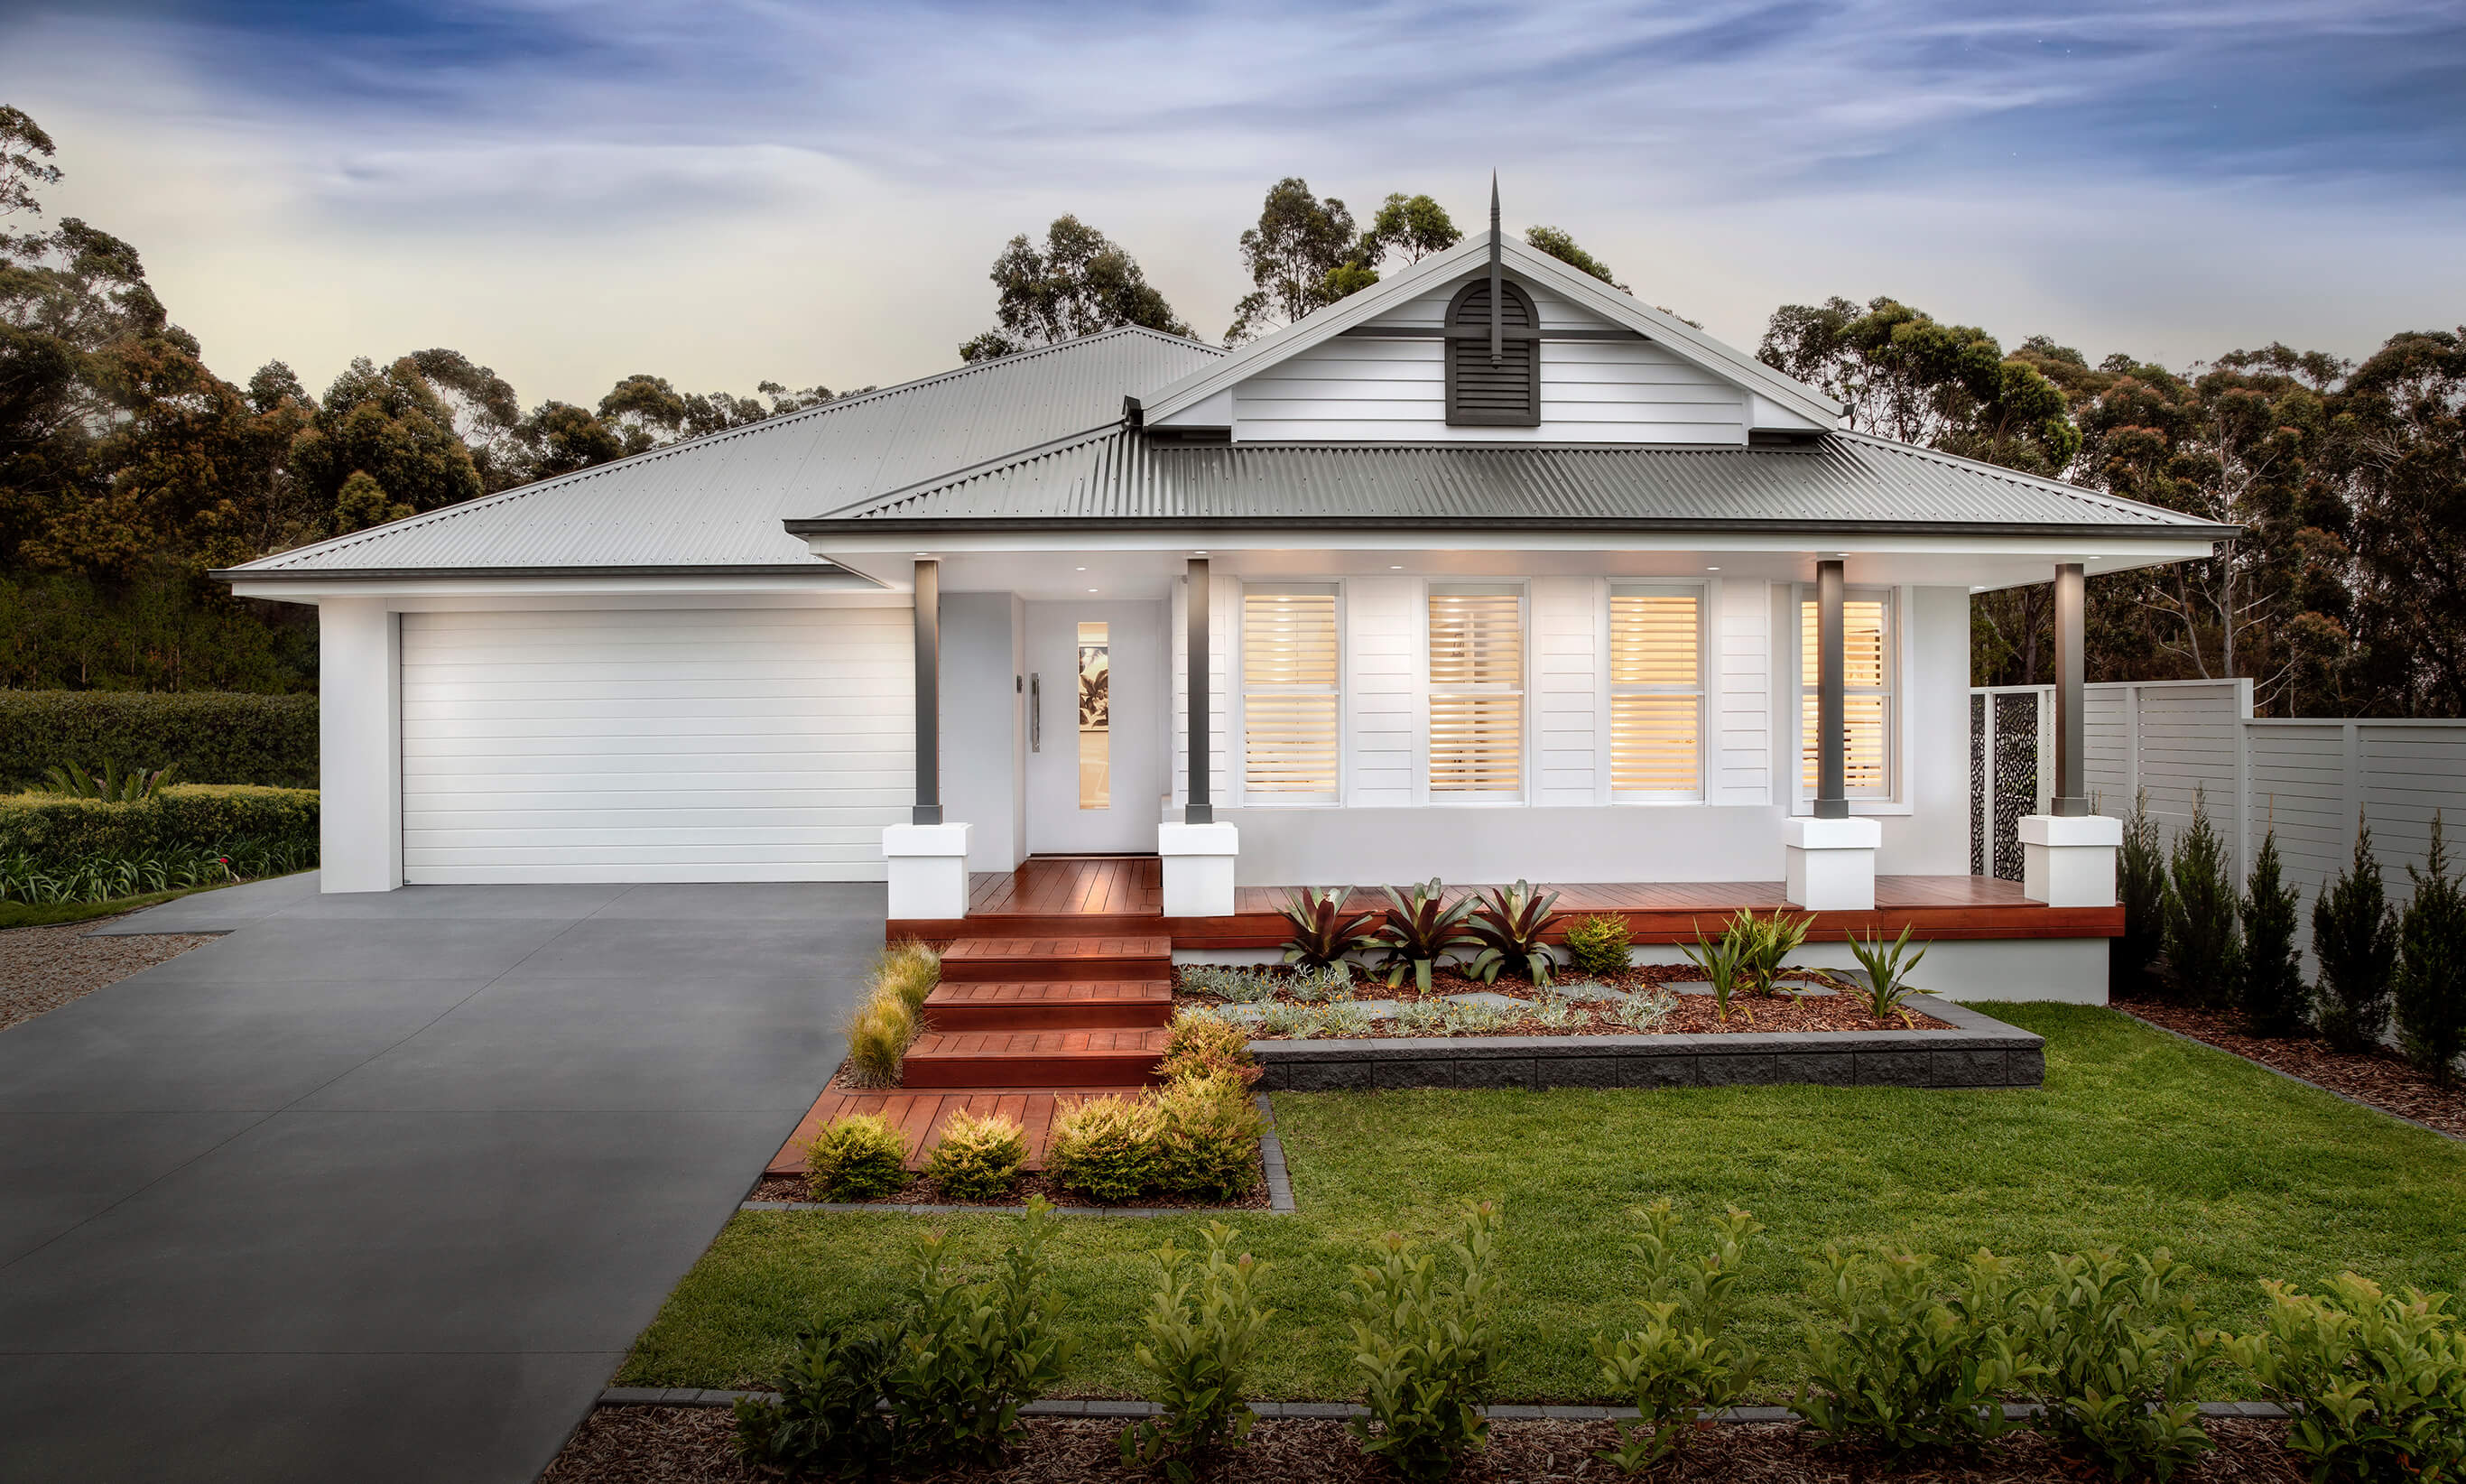 San Marino Home Design with Traditional Cladding